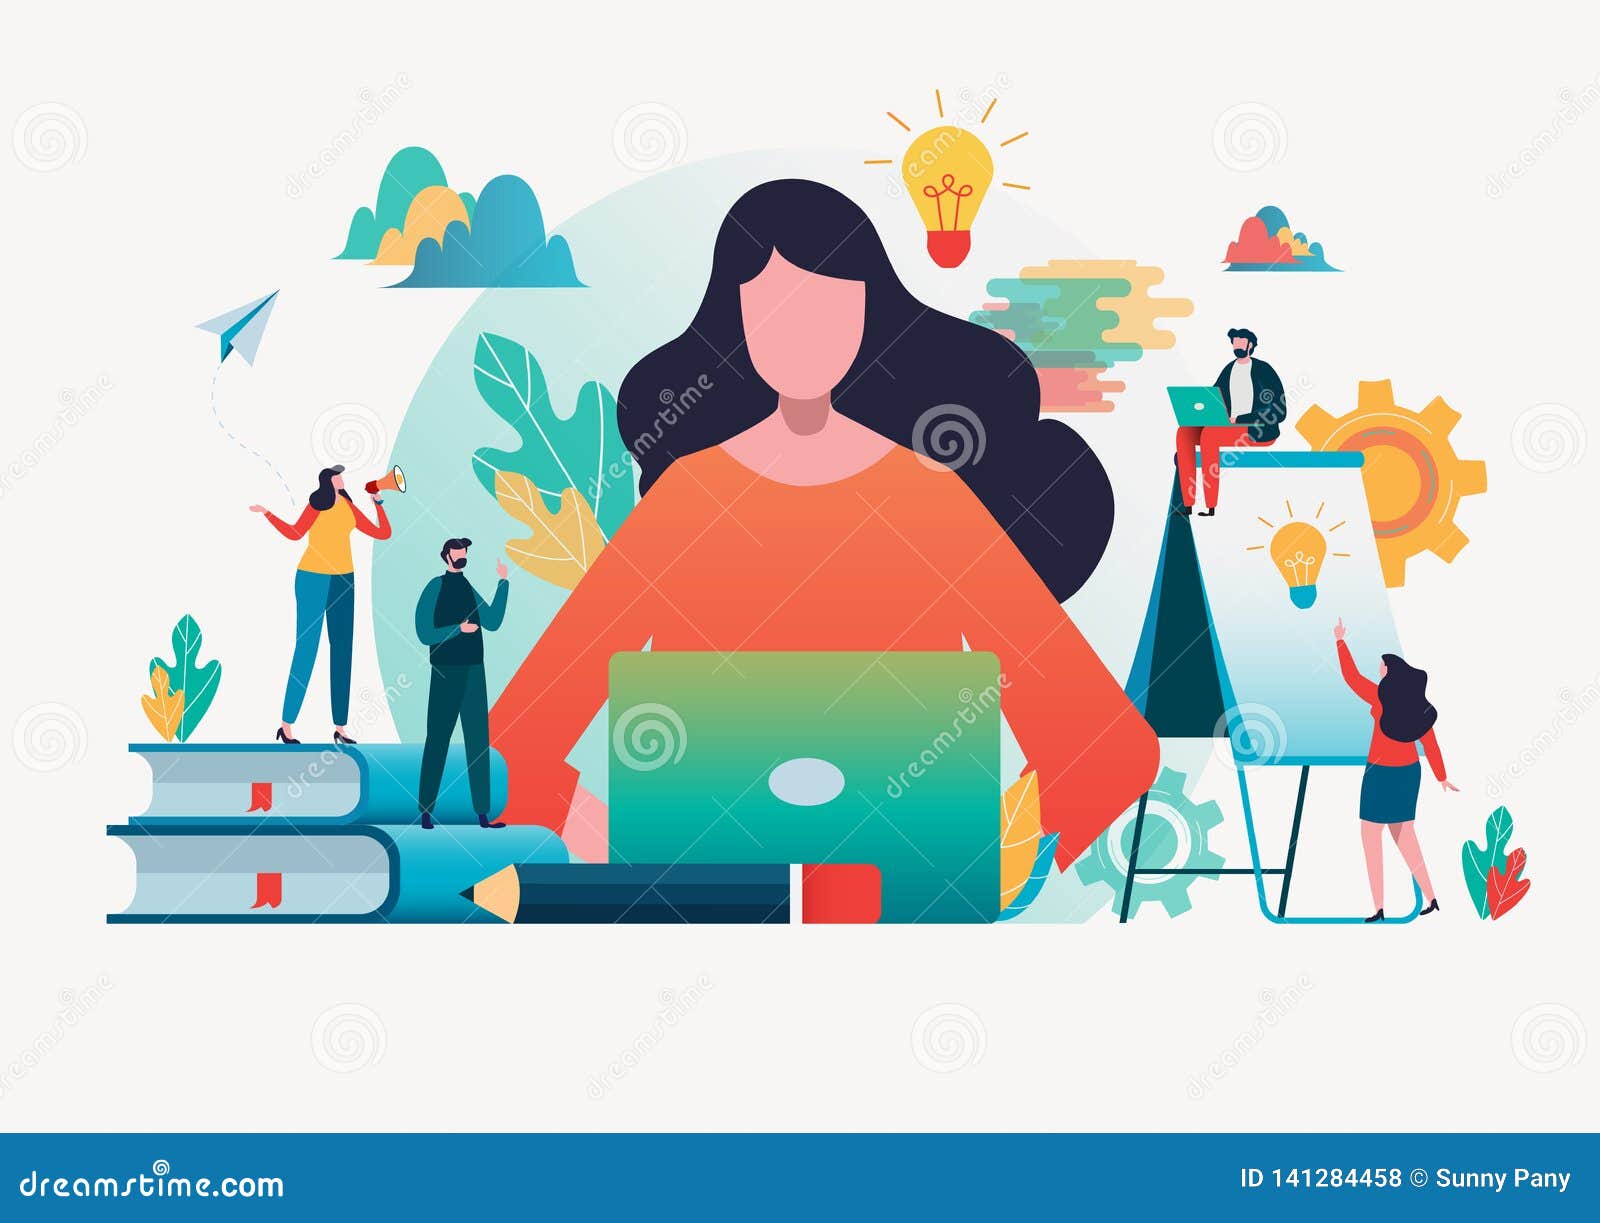 People Create Idea To  Cartoon Character Graphic Design Stock  Illustration - Illustration of background, cooperation: 141284458